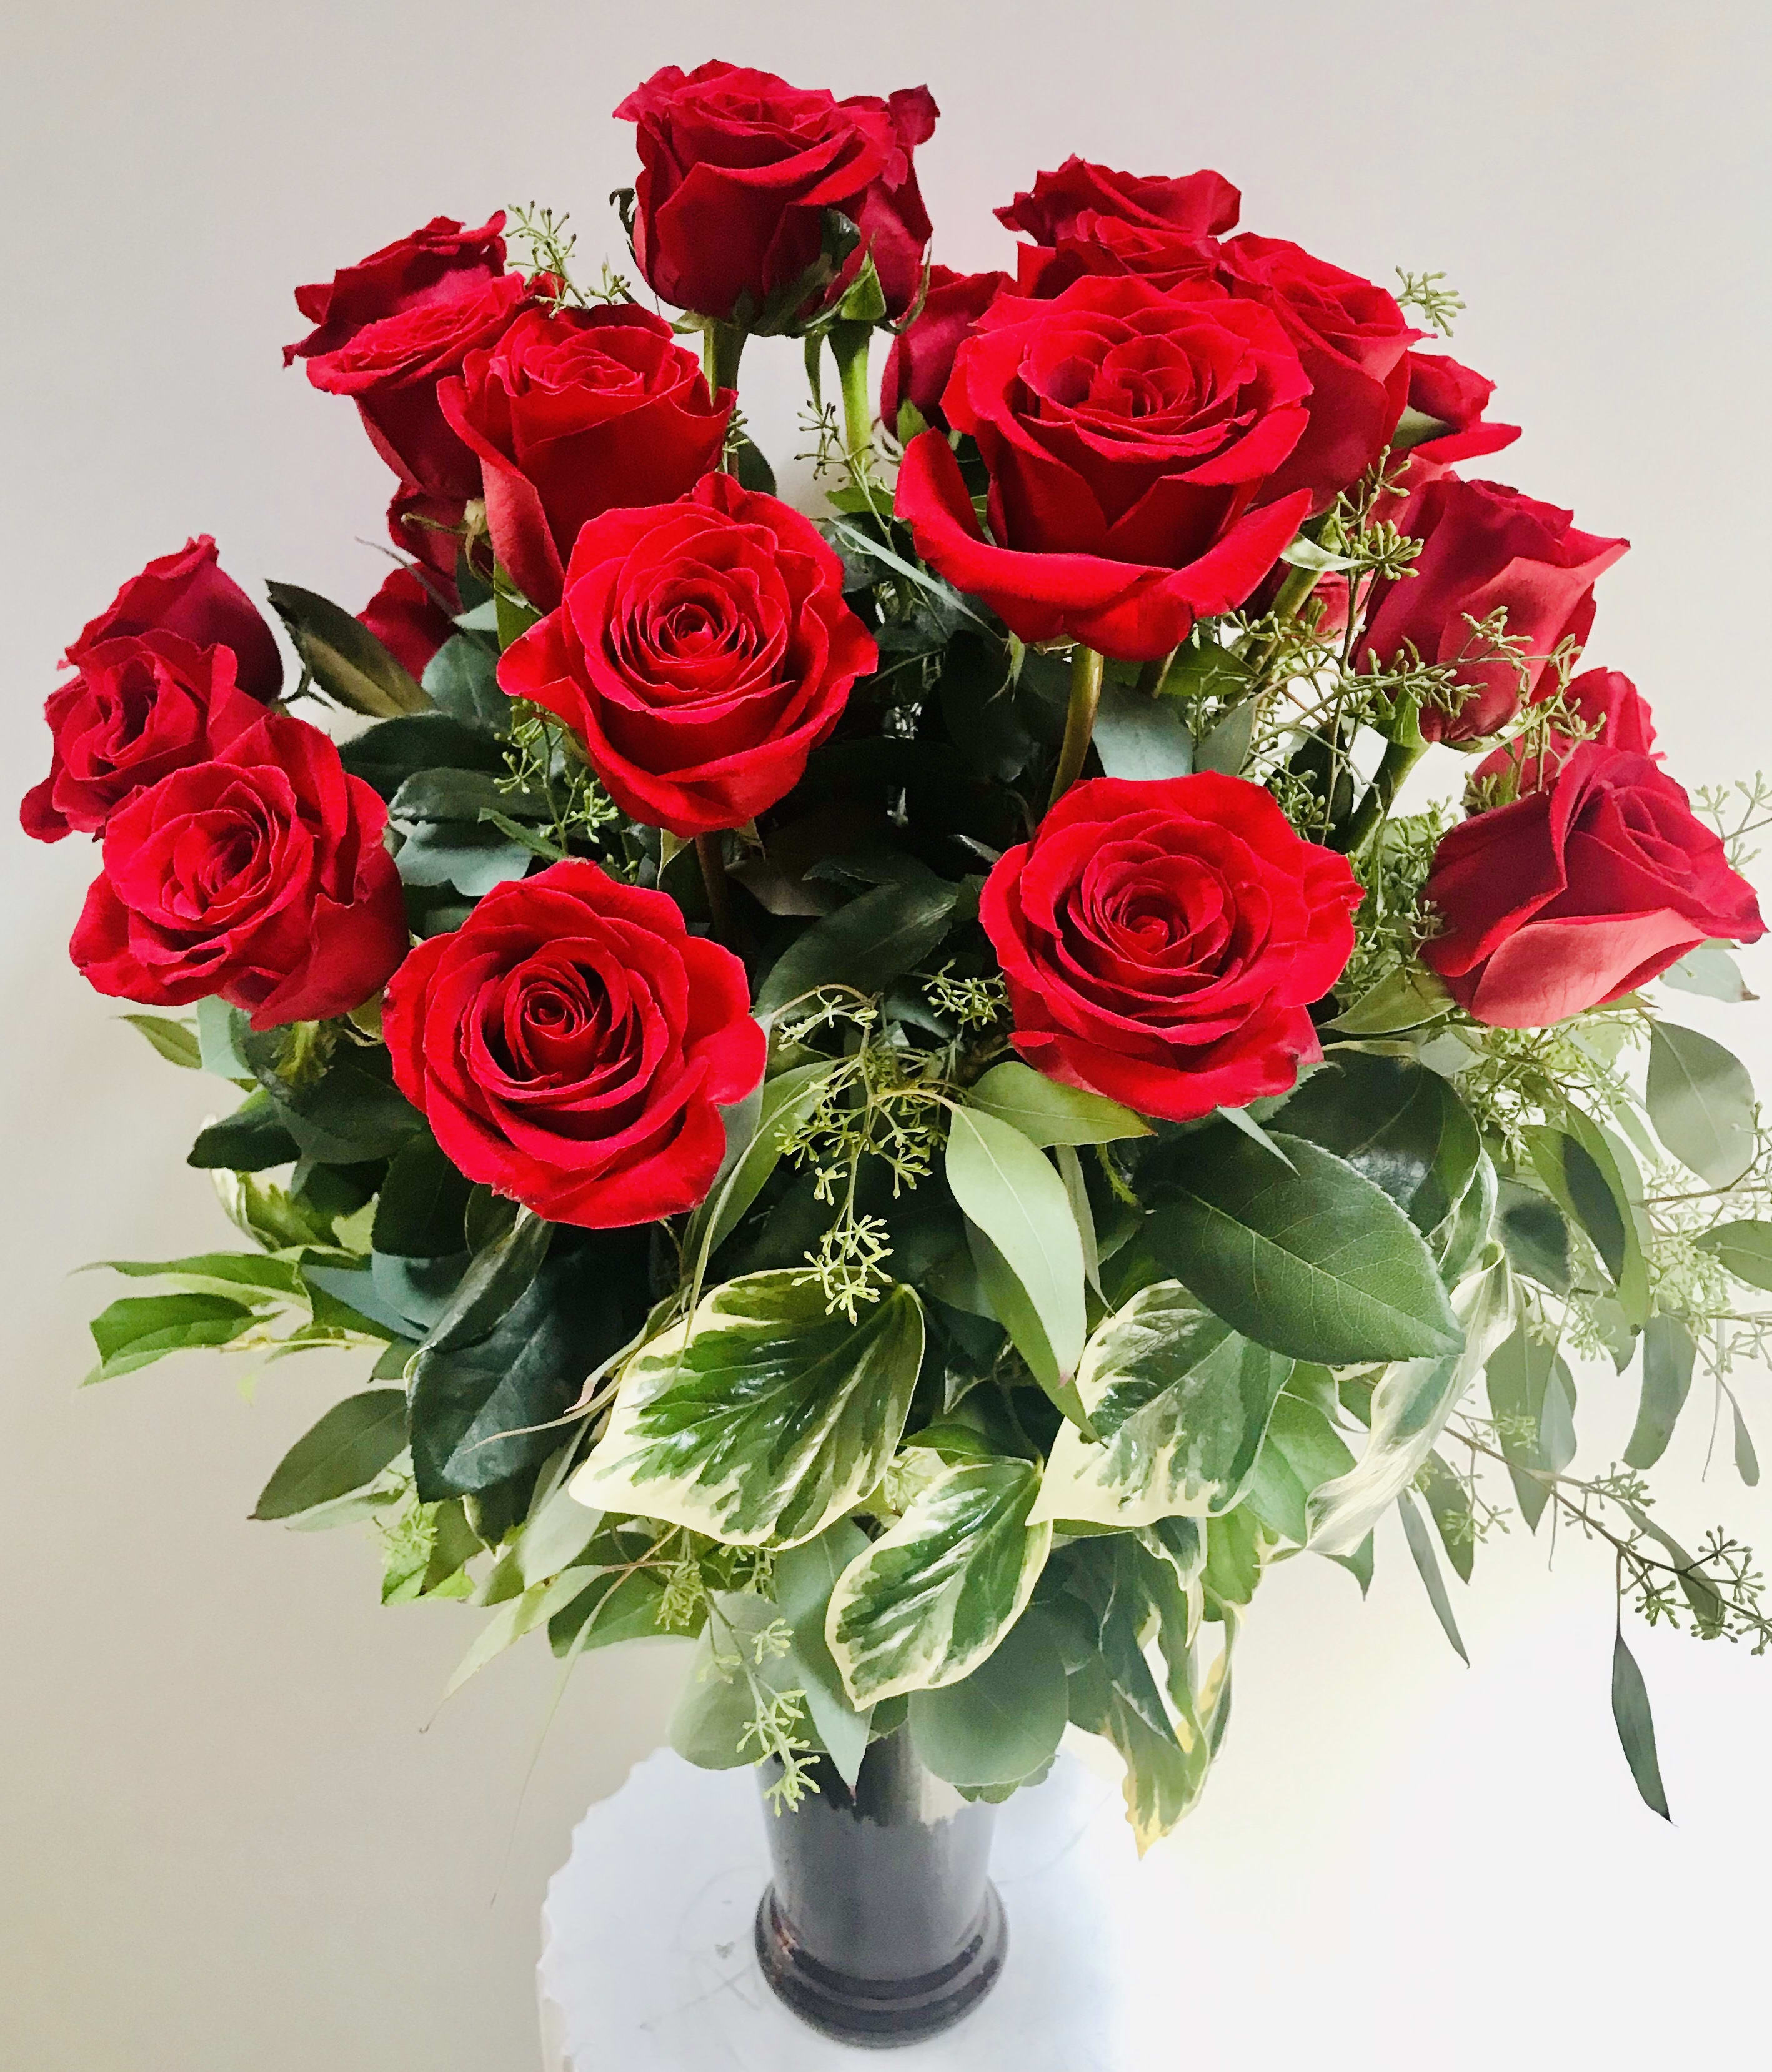 Breakfast at Tiffany's - Two dozen red roses with a greenery in a glass vase